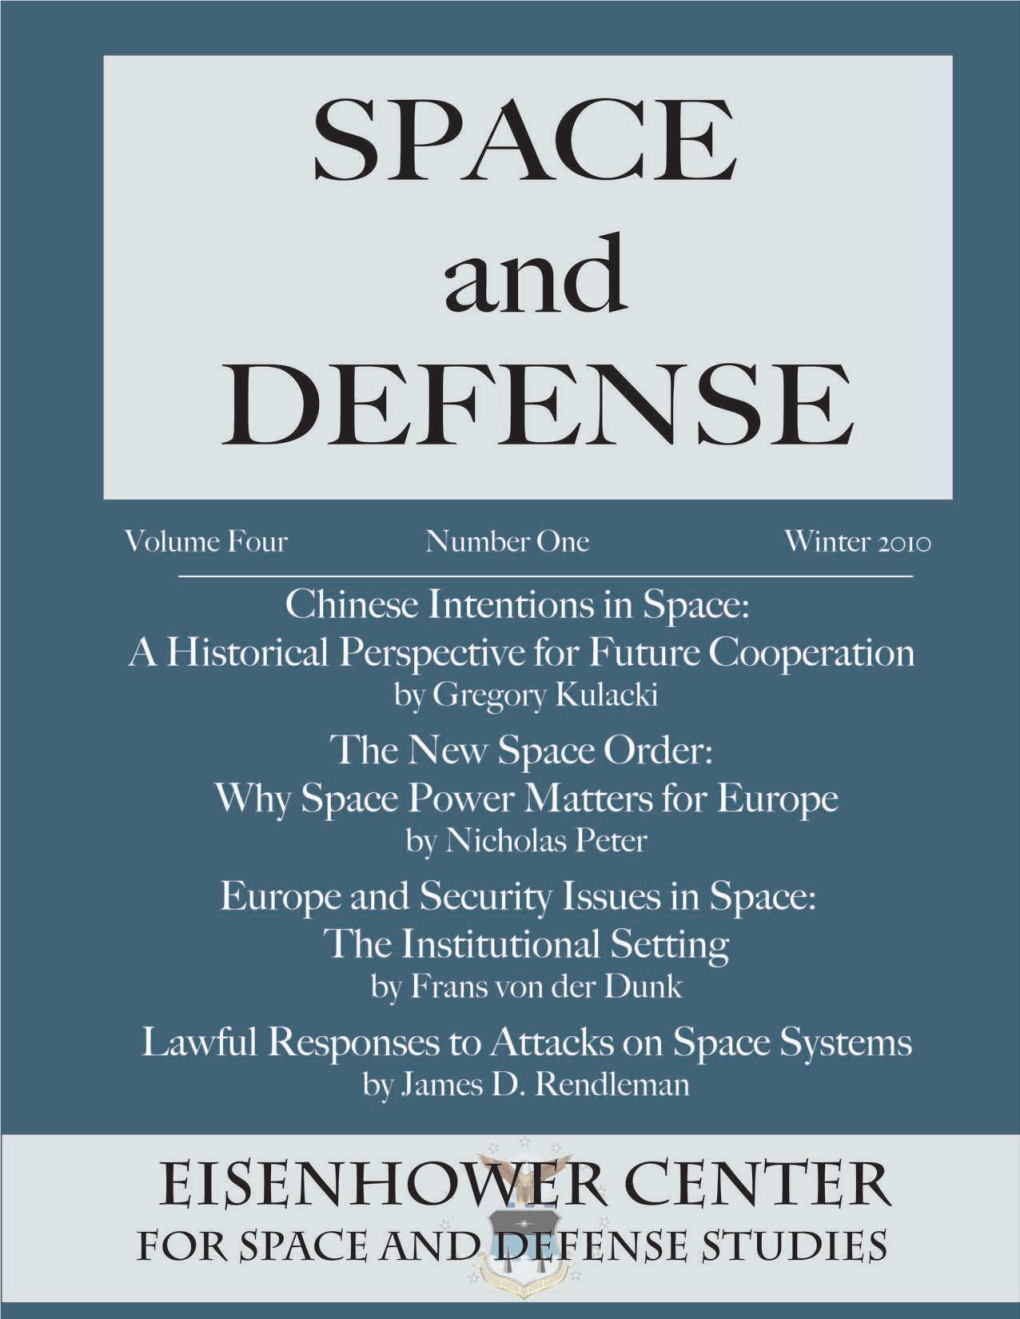 Space and Defense Scholarly Journal of the United States Air Force Academy Eisenhower Center for Space and Defense Studies